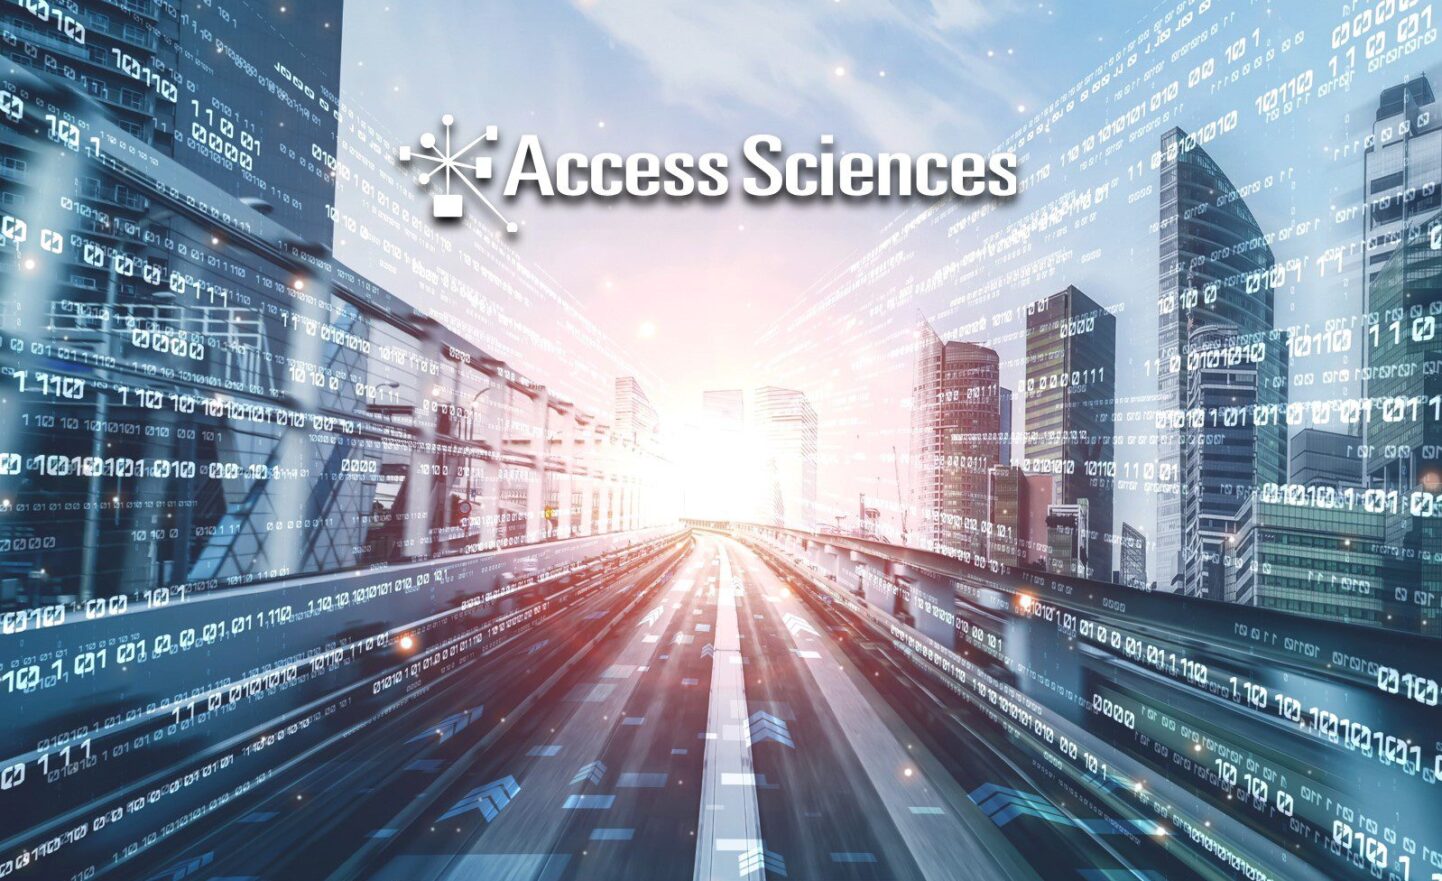 Access Sciences’ mission is to Tame Information Chaos.